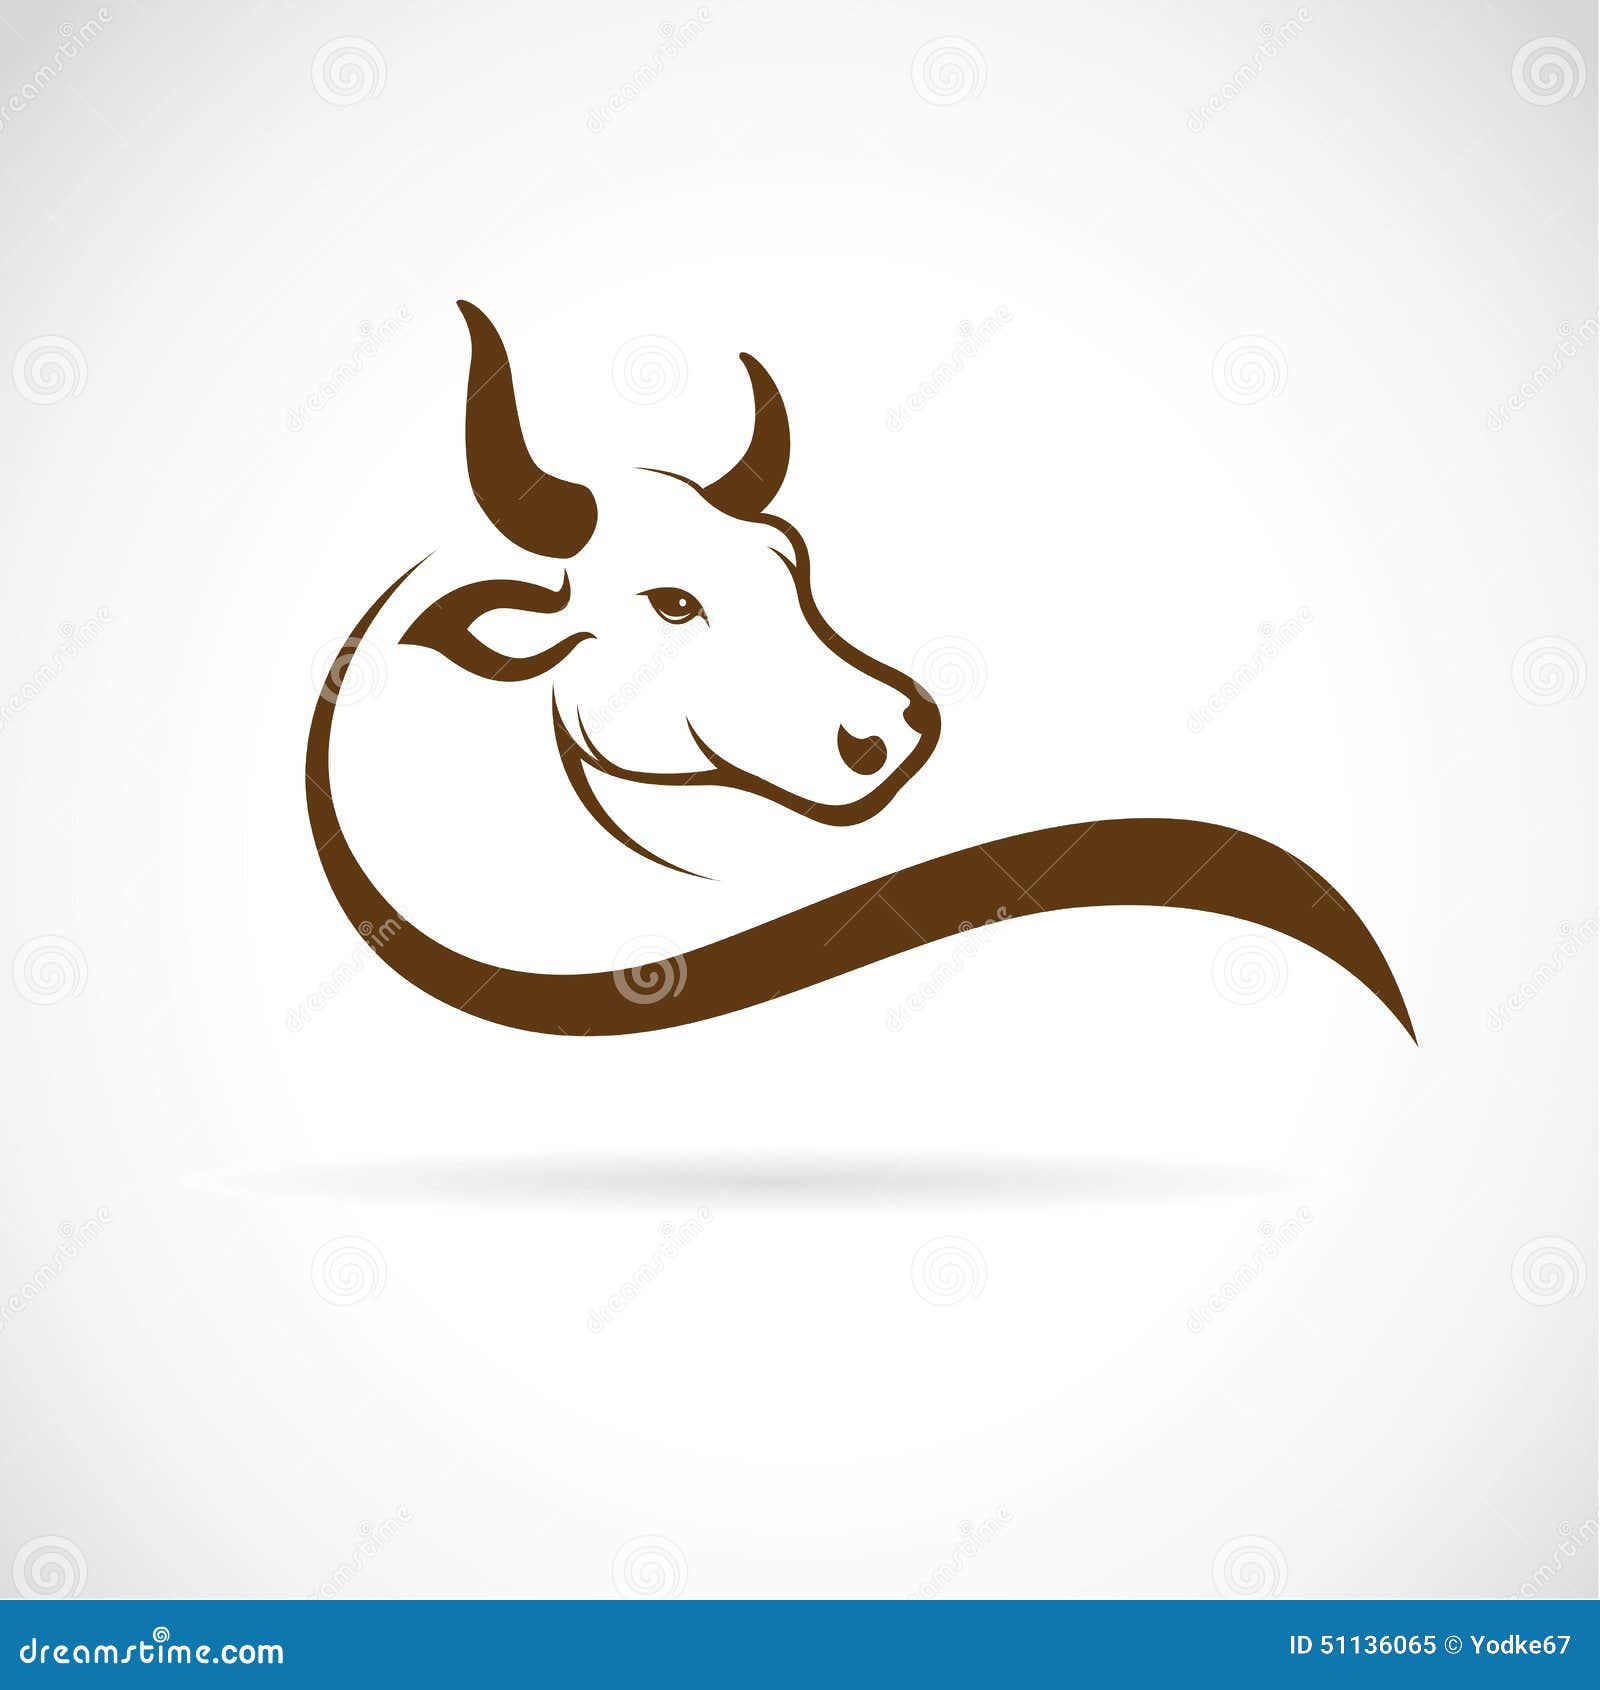 Vector Image Of An Bull Head Stock Vector - Image: 51136065